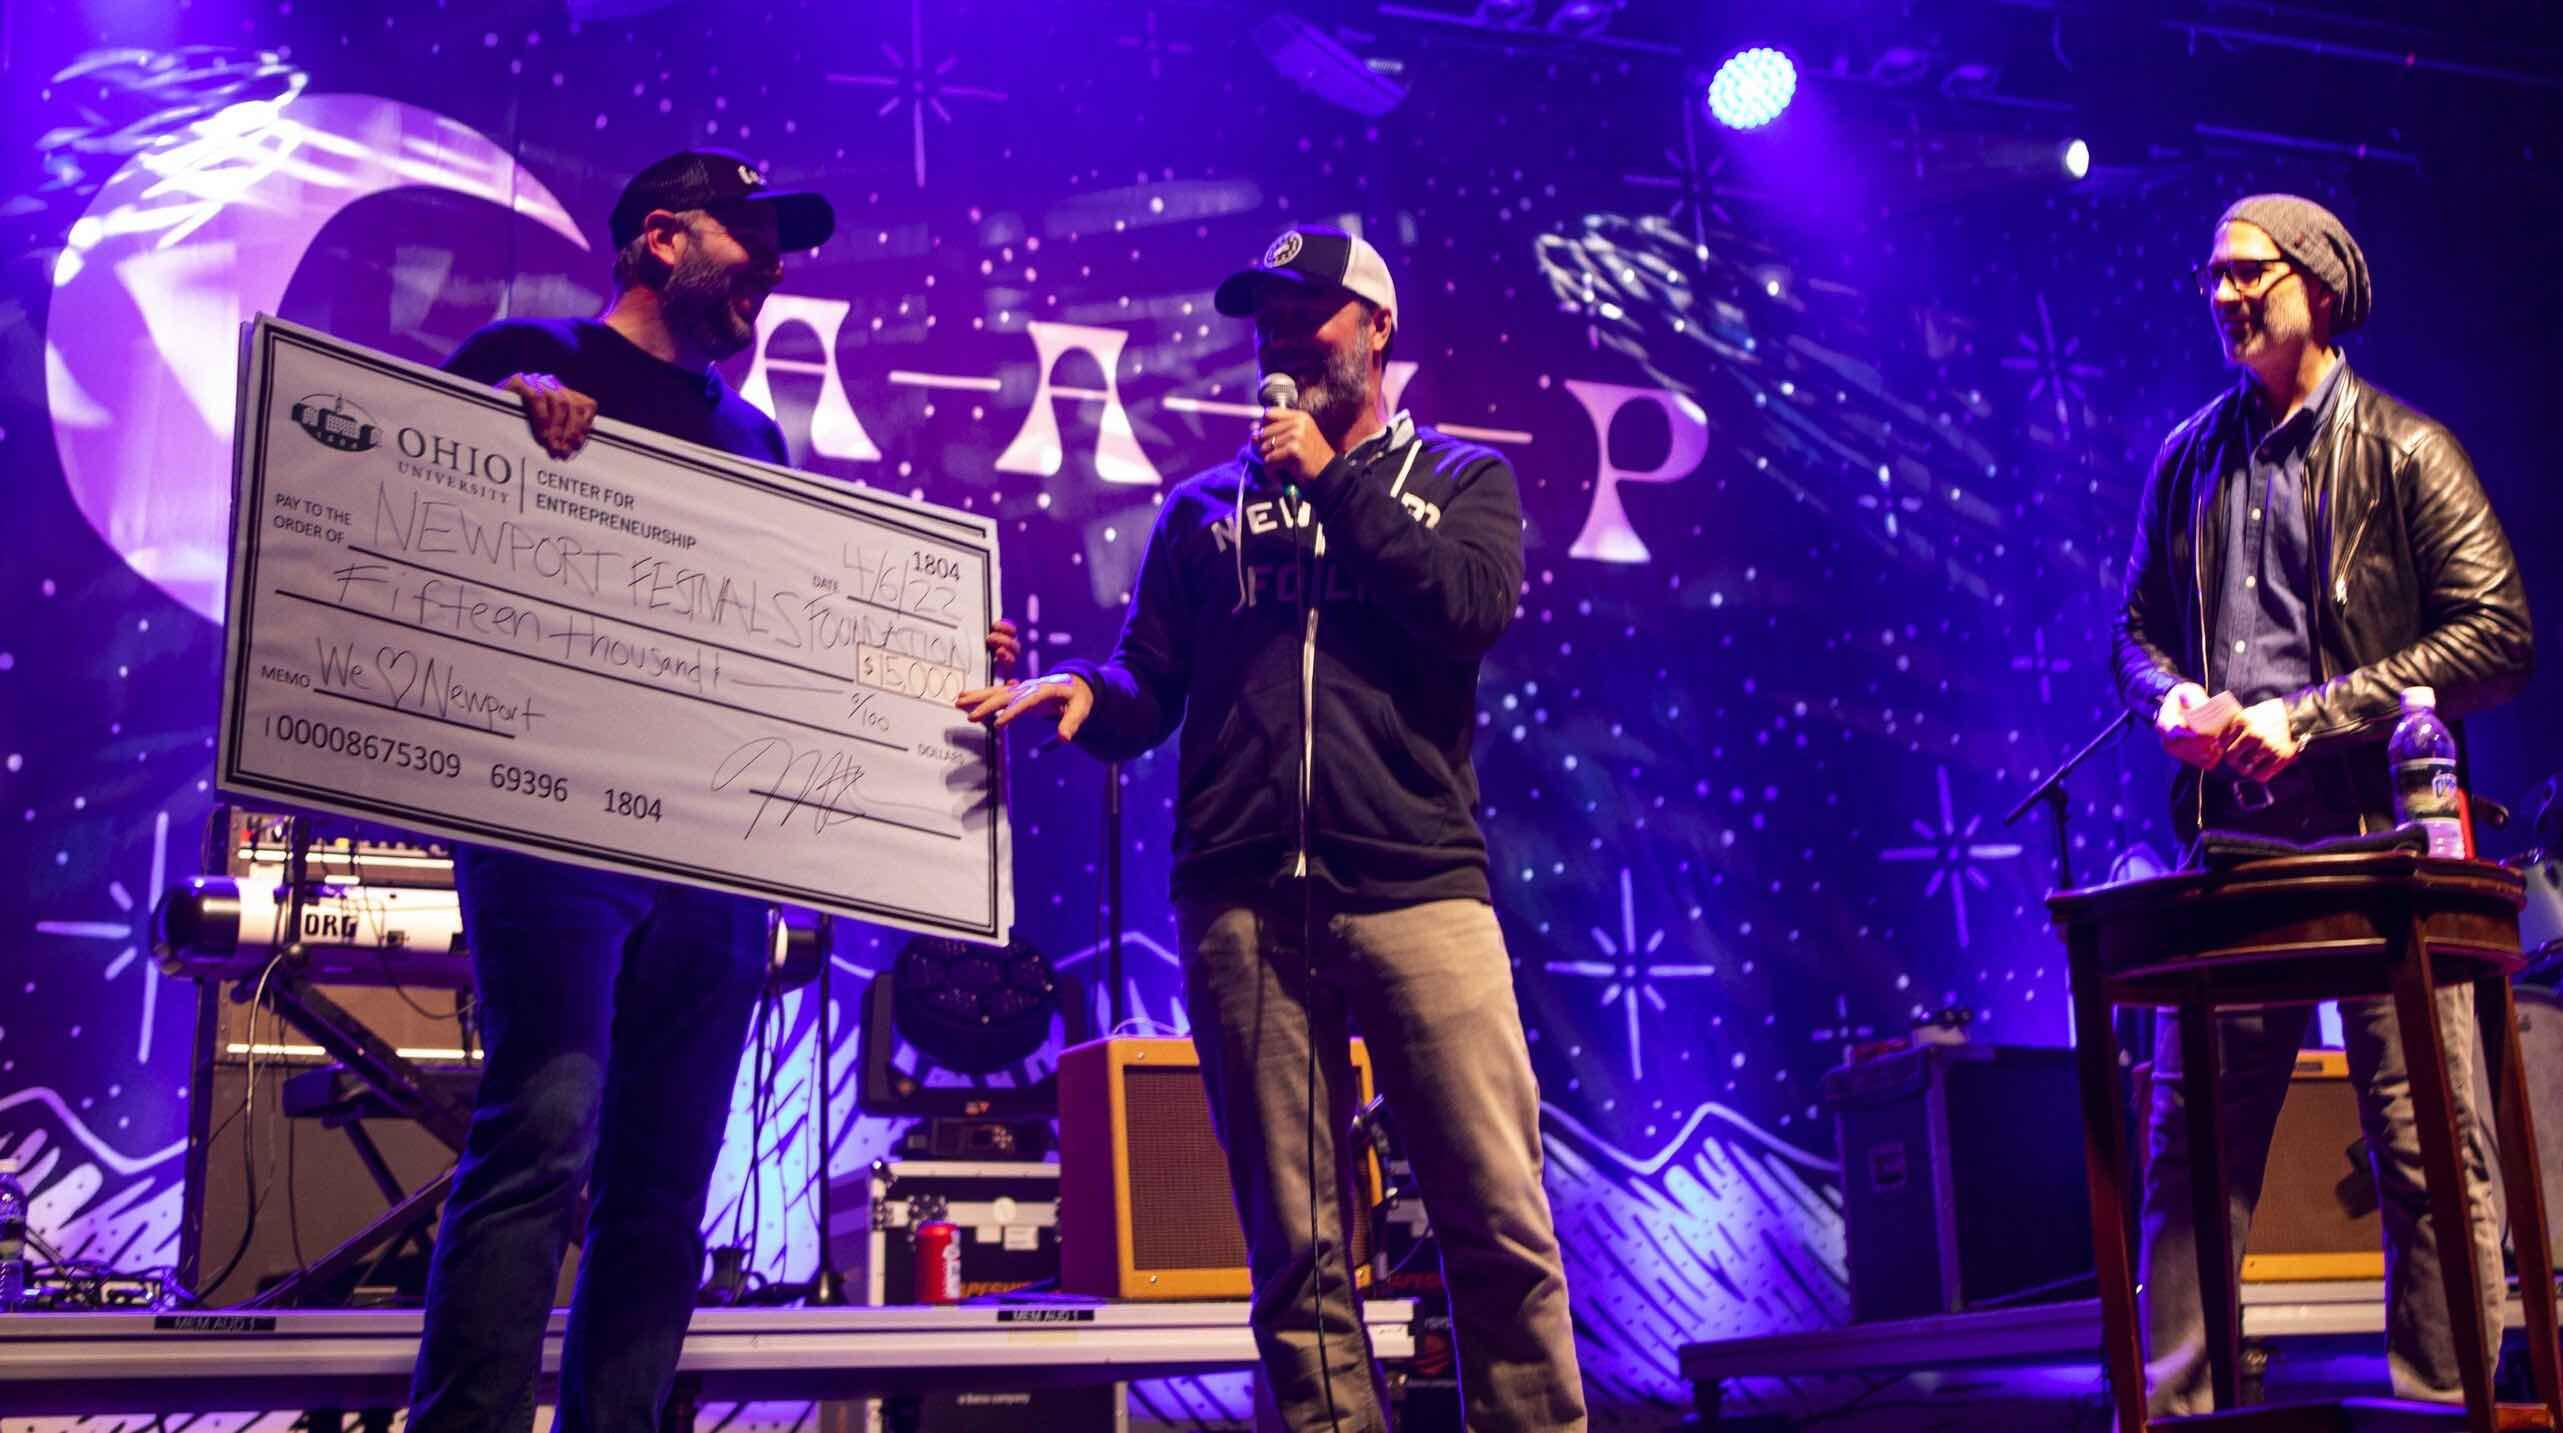 Three men on stage presenting an oversized check donation